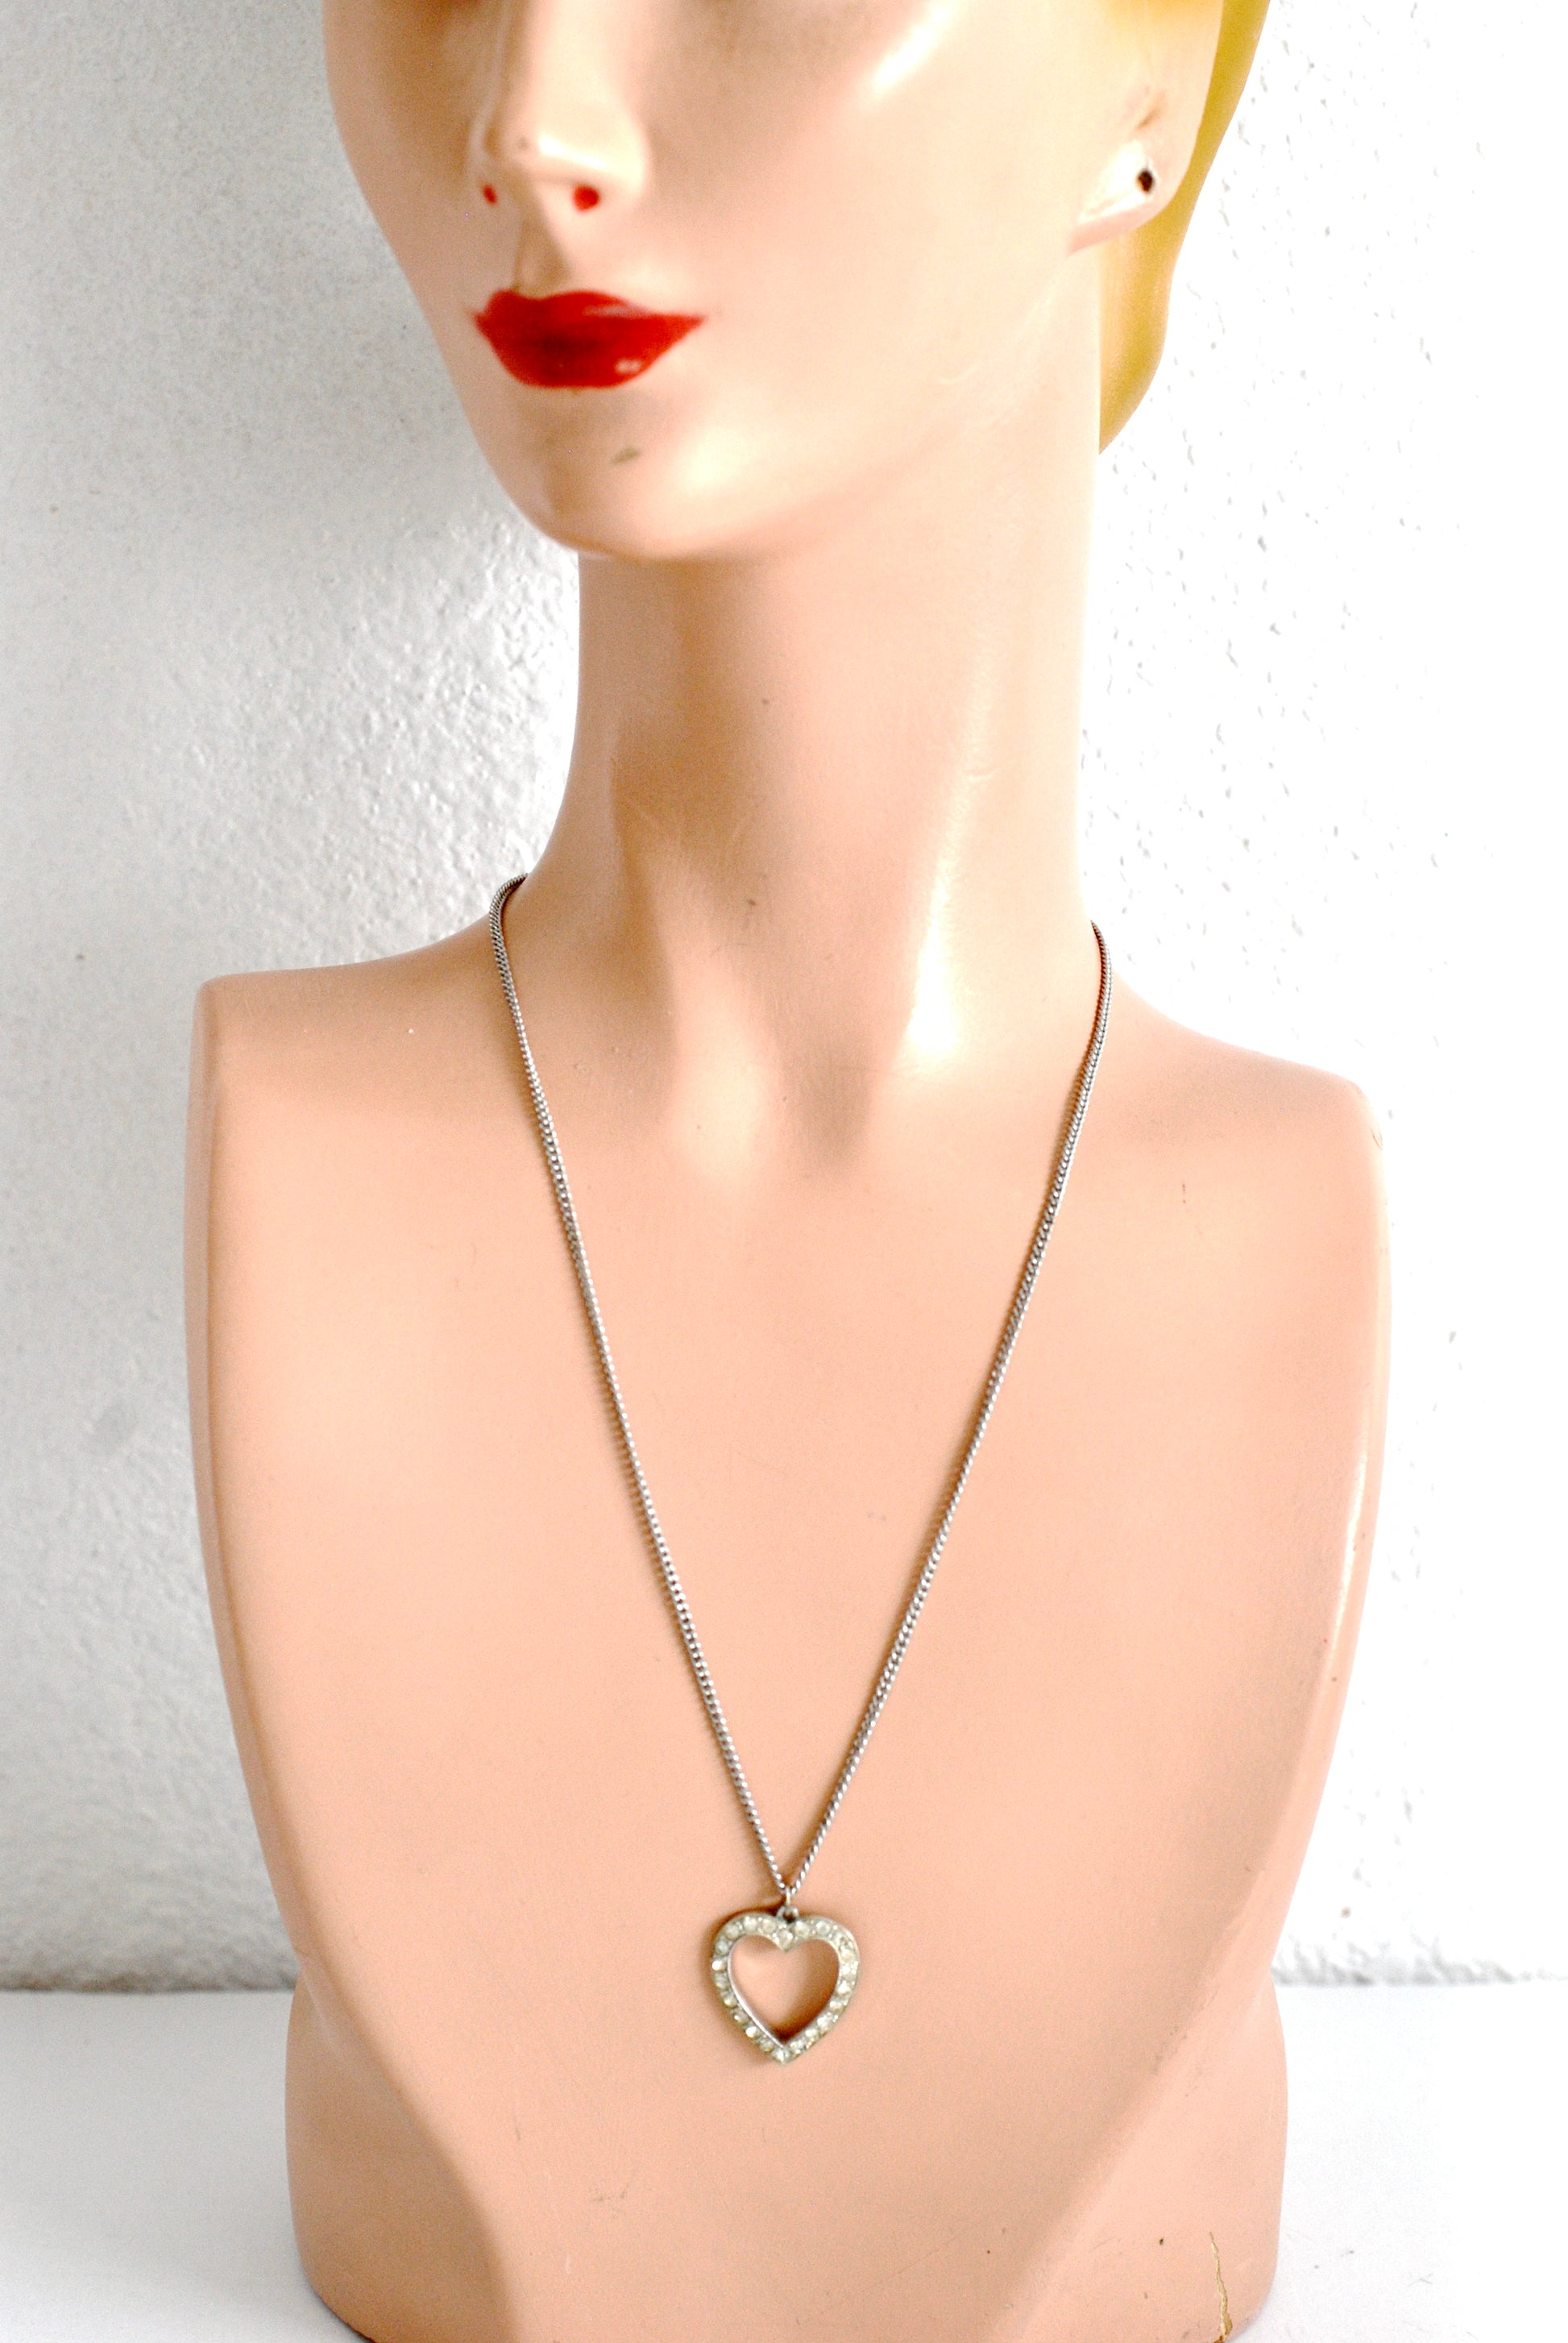 Vintage 1950s Clear Rhinestone and Rhodium Heart Pendant Necklace